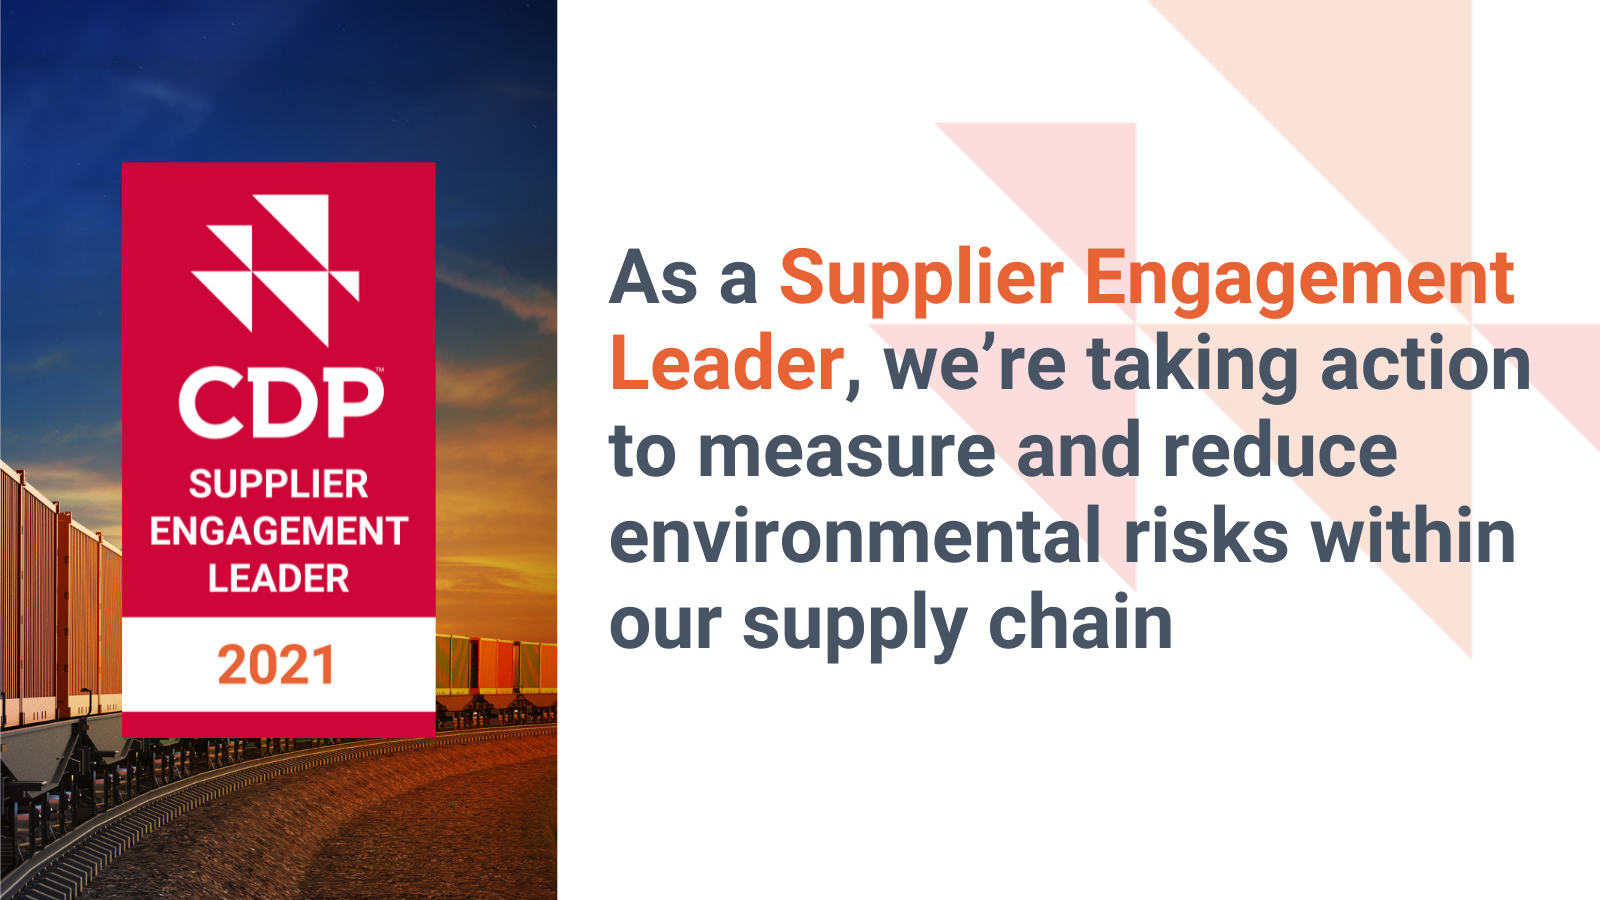 As a Supplier Engagement Leader, we're taking action to measure and reduce environmental risks within our supply chain.